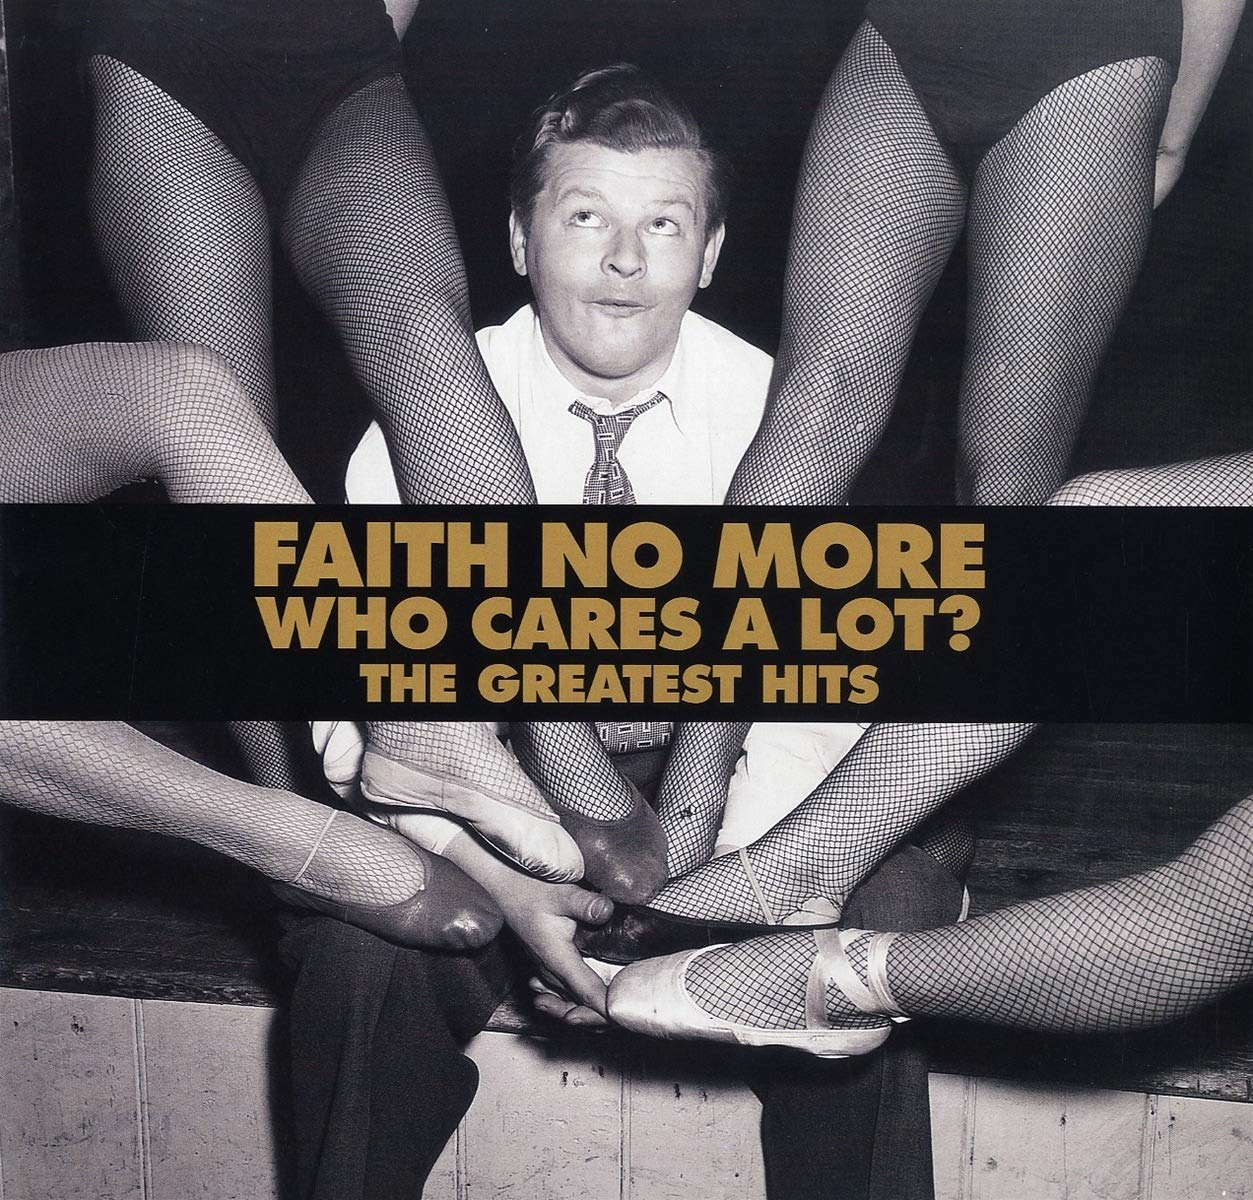 FAITH NO MORE 'WHO CARES A LOT - THE GREATEST HITS' 2LP (Clear Vinyl)